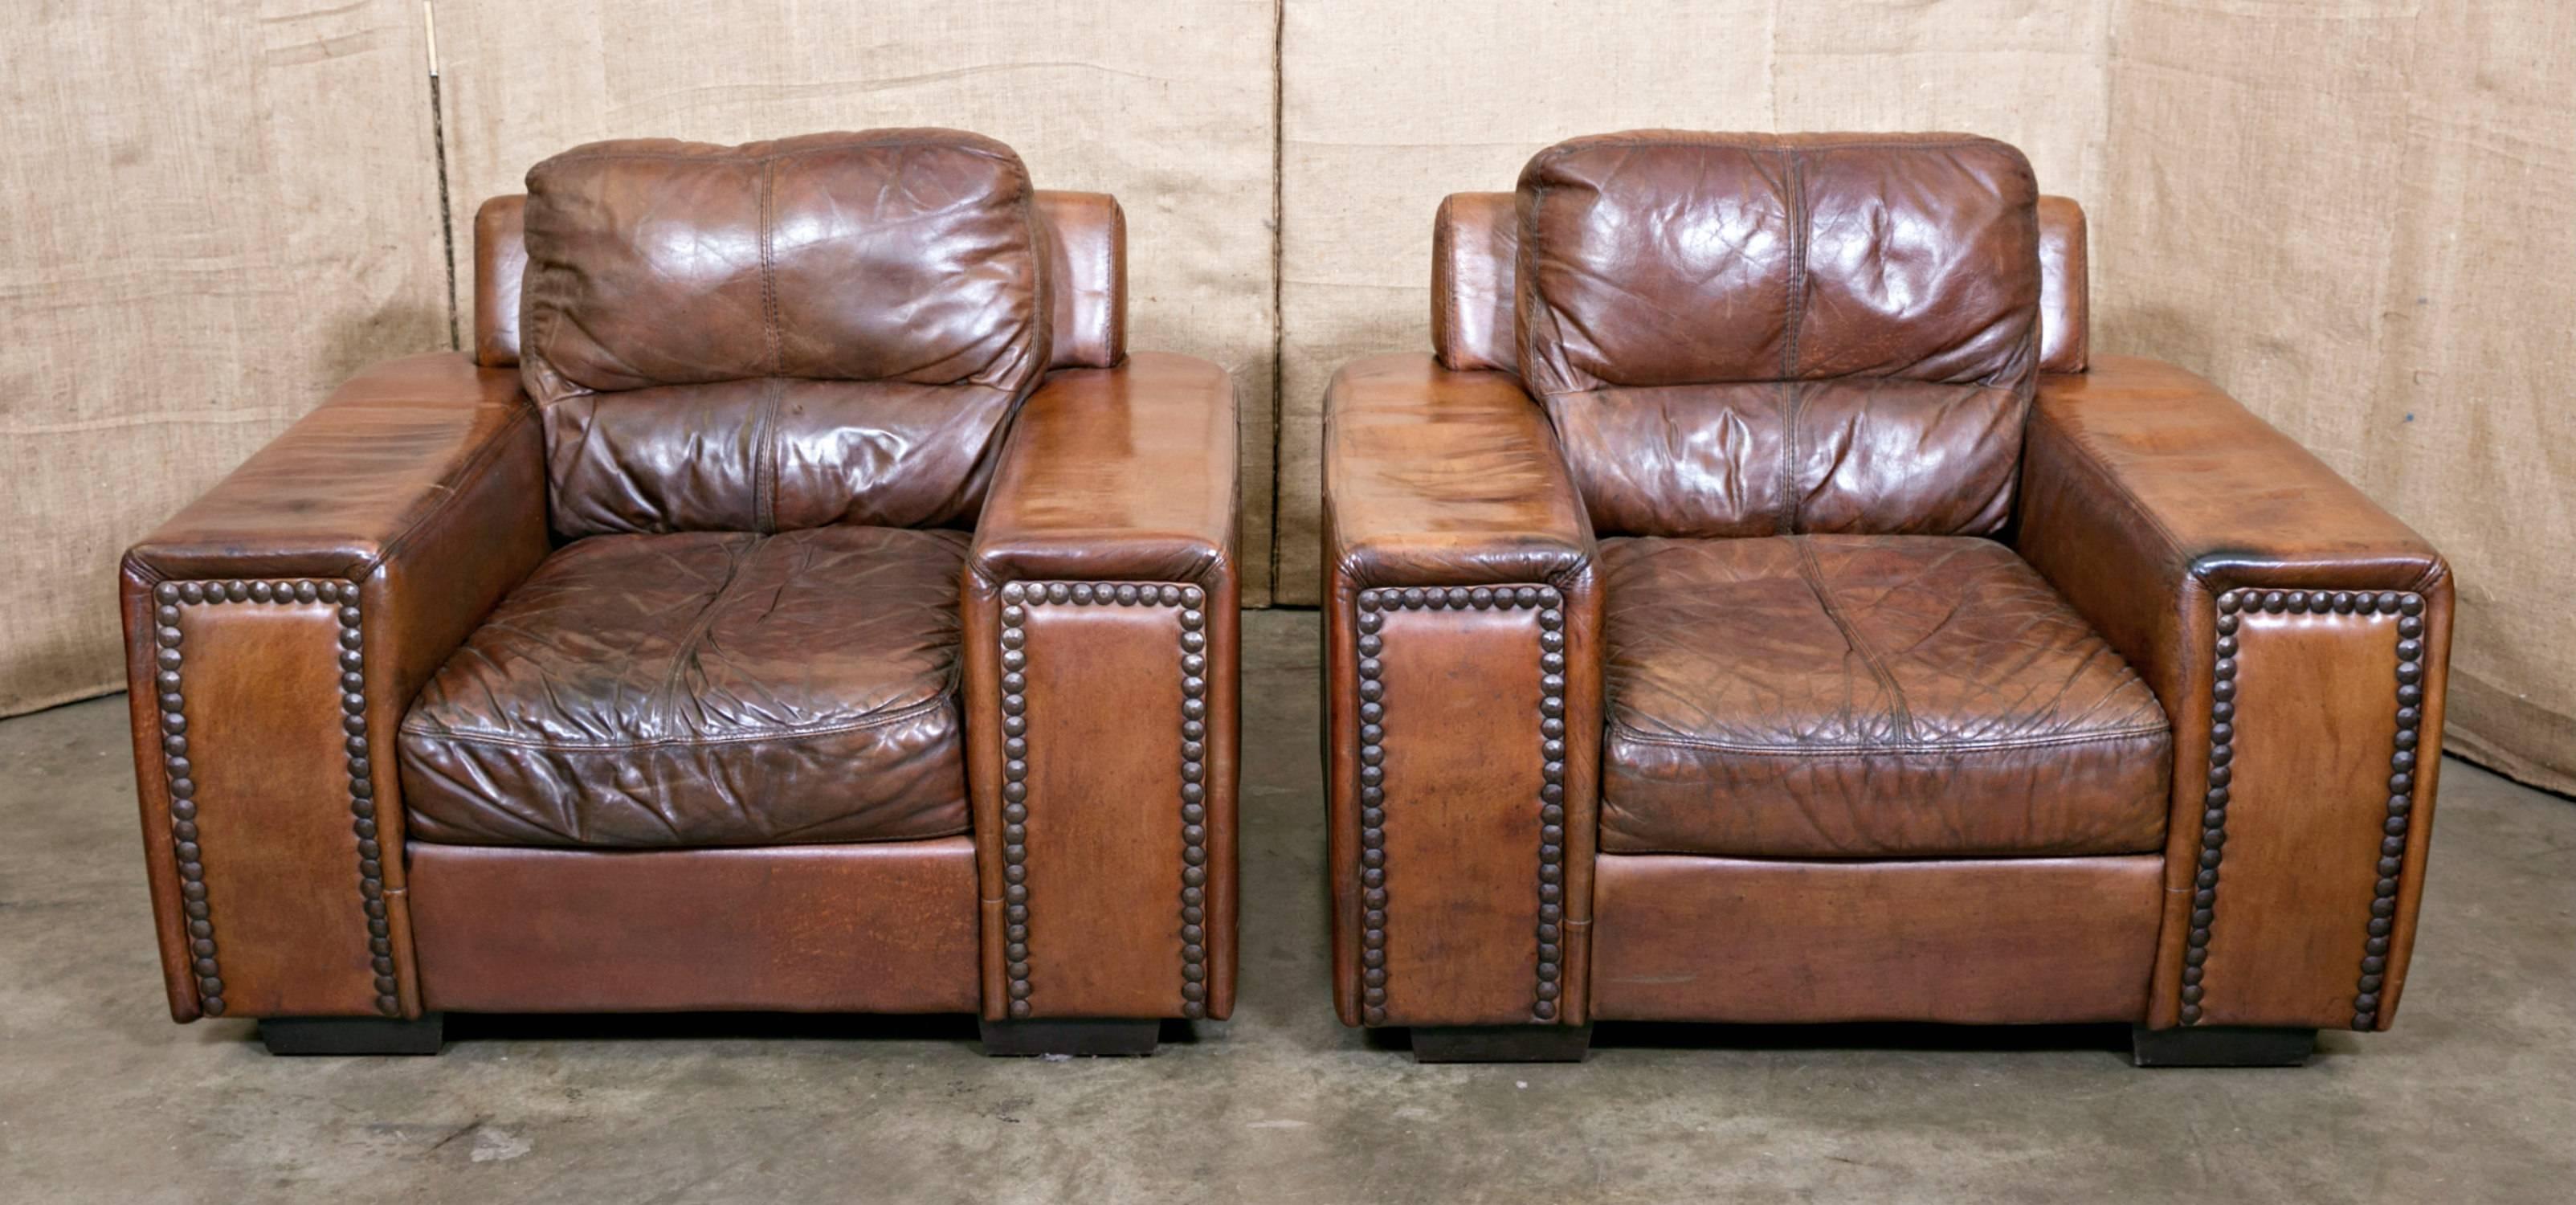 These ultra-cool 1970s French club chairs in handsome brown leather burnished to vintage perfection will add character and style to any decor. They're possibly the most comfortable pair of chairs ever, having large sturdy arms with nail head trim